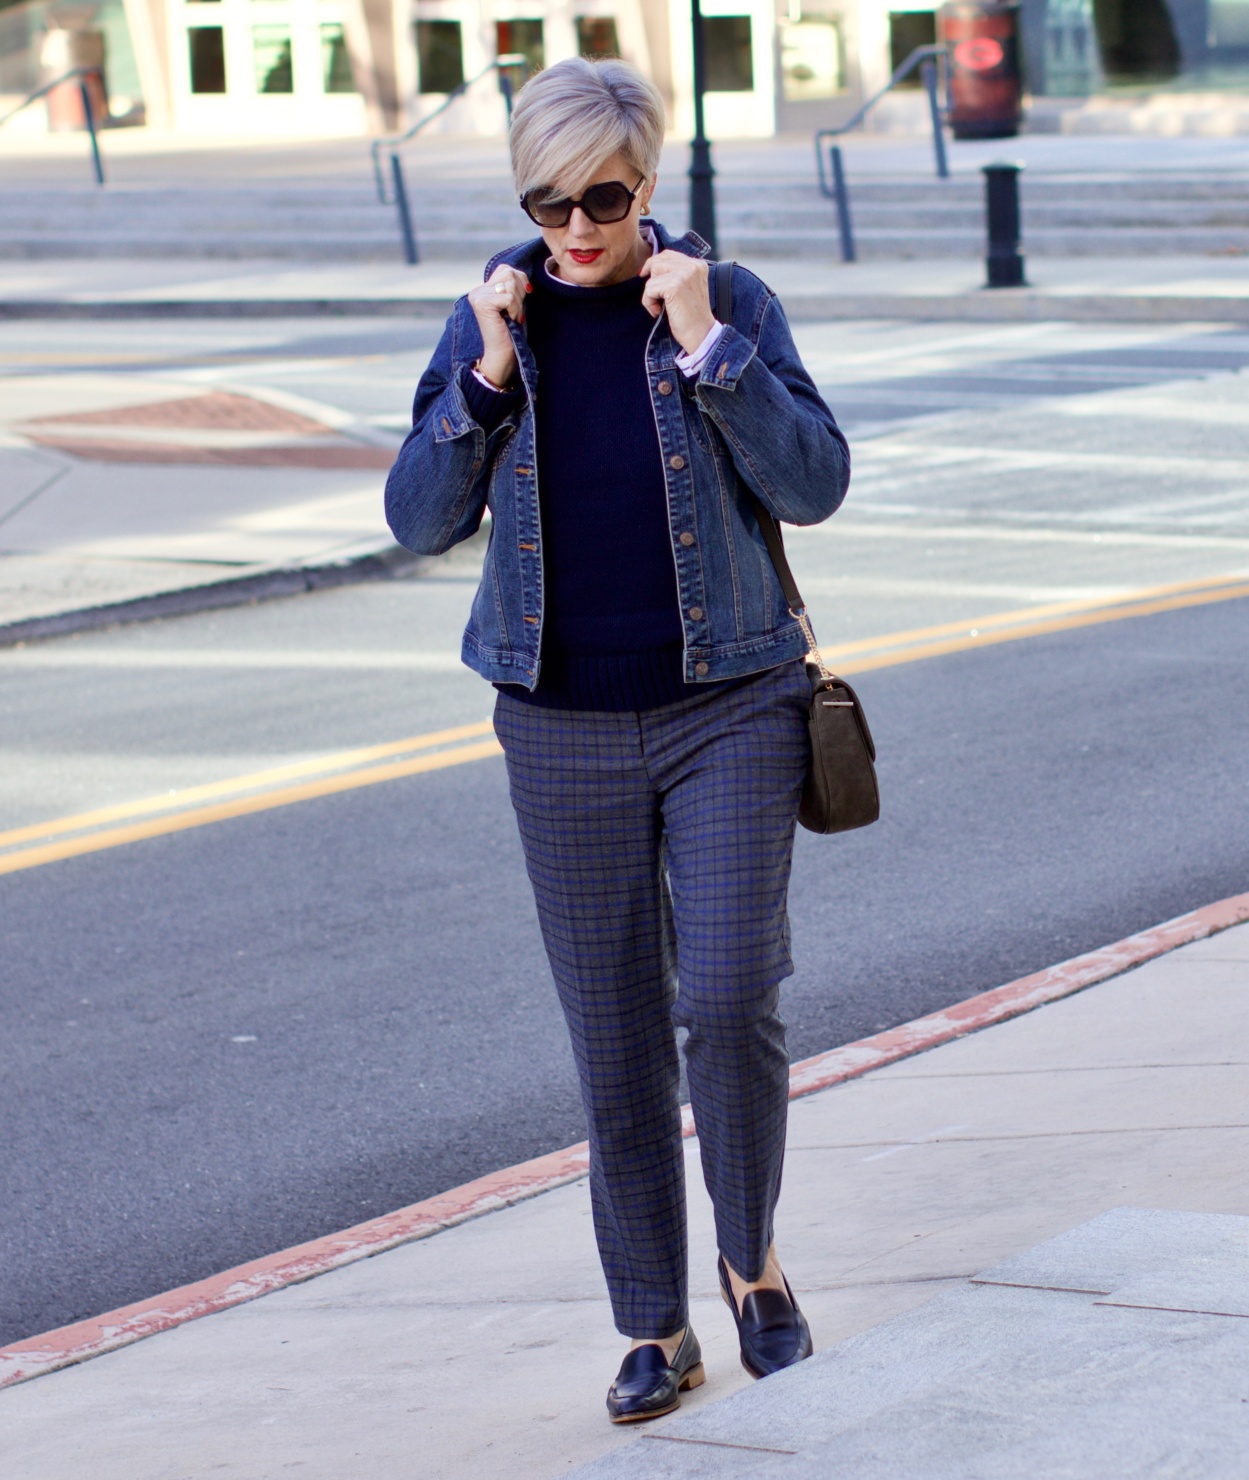 beth from style at a certain age wears a jean jacket, plaid pants, navy blue roll neck sweater, striped shirt, and navy blue loafers